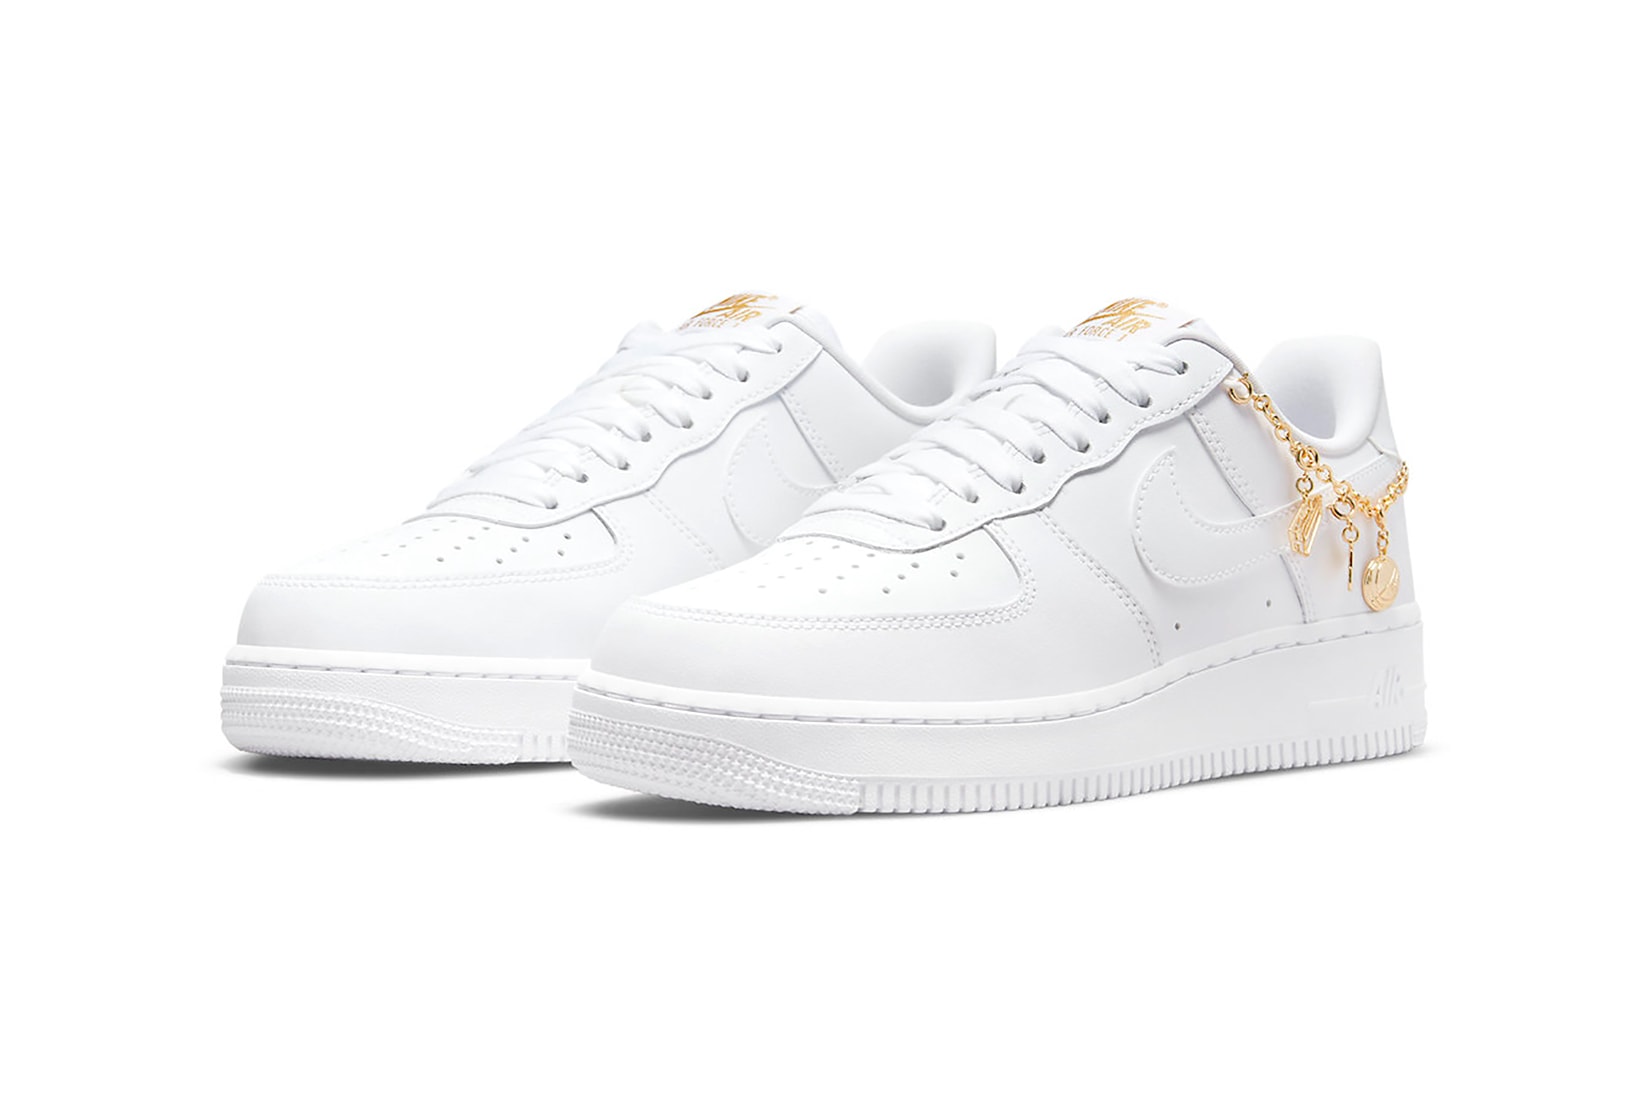 Nike Air Force 1 AF1 Low LX Lucky Charms White Gold Footwear Kicks Sneakers Shoes